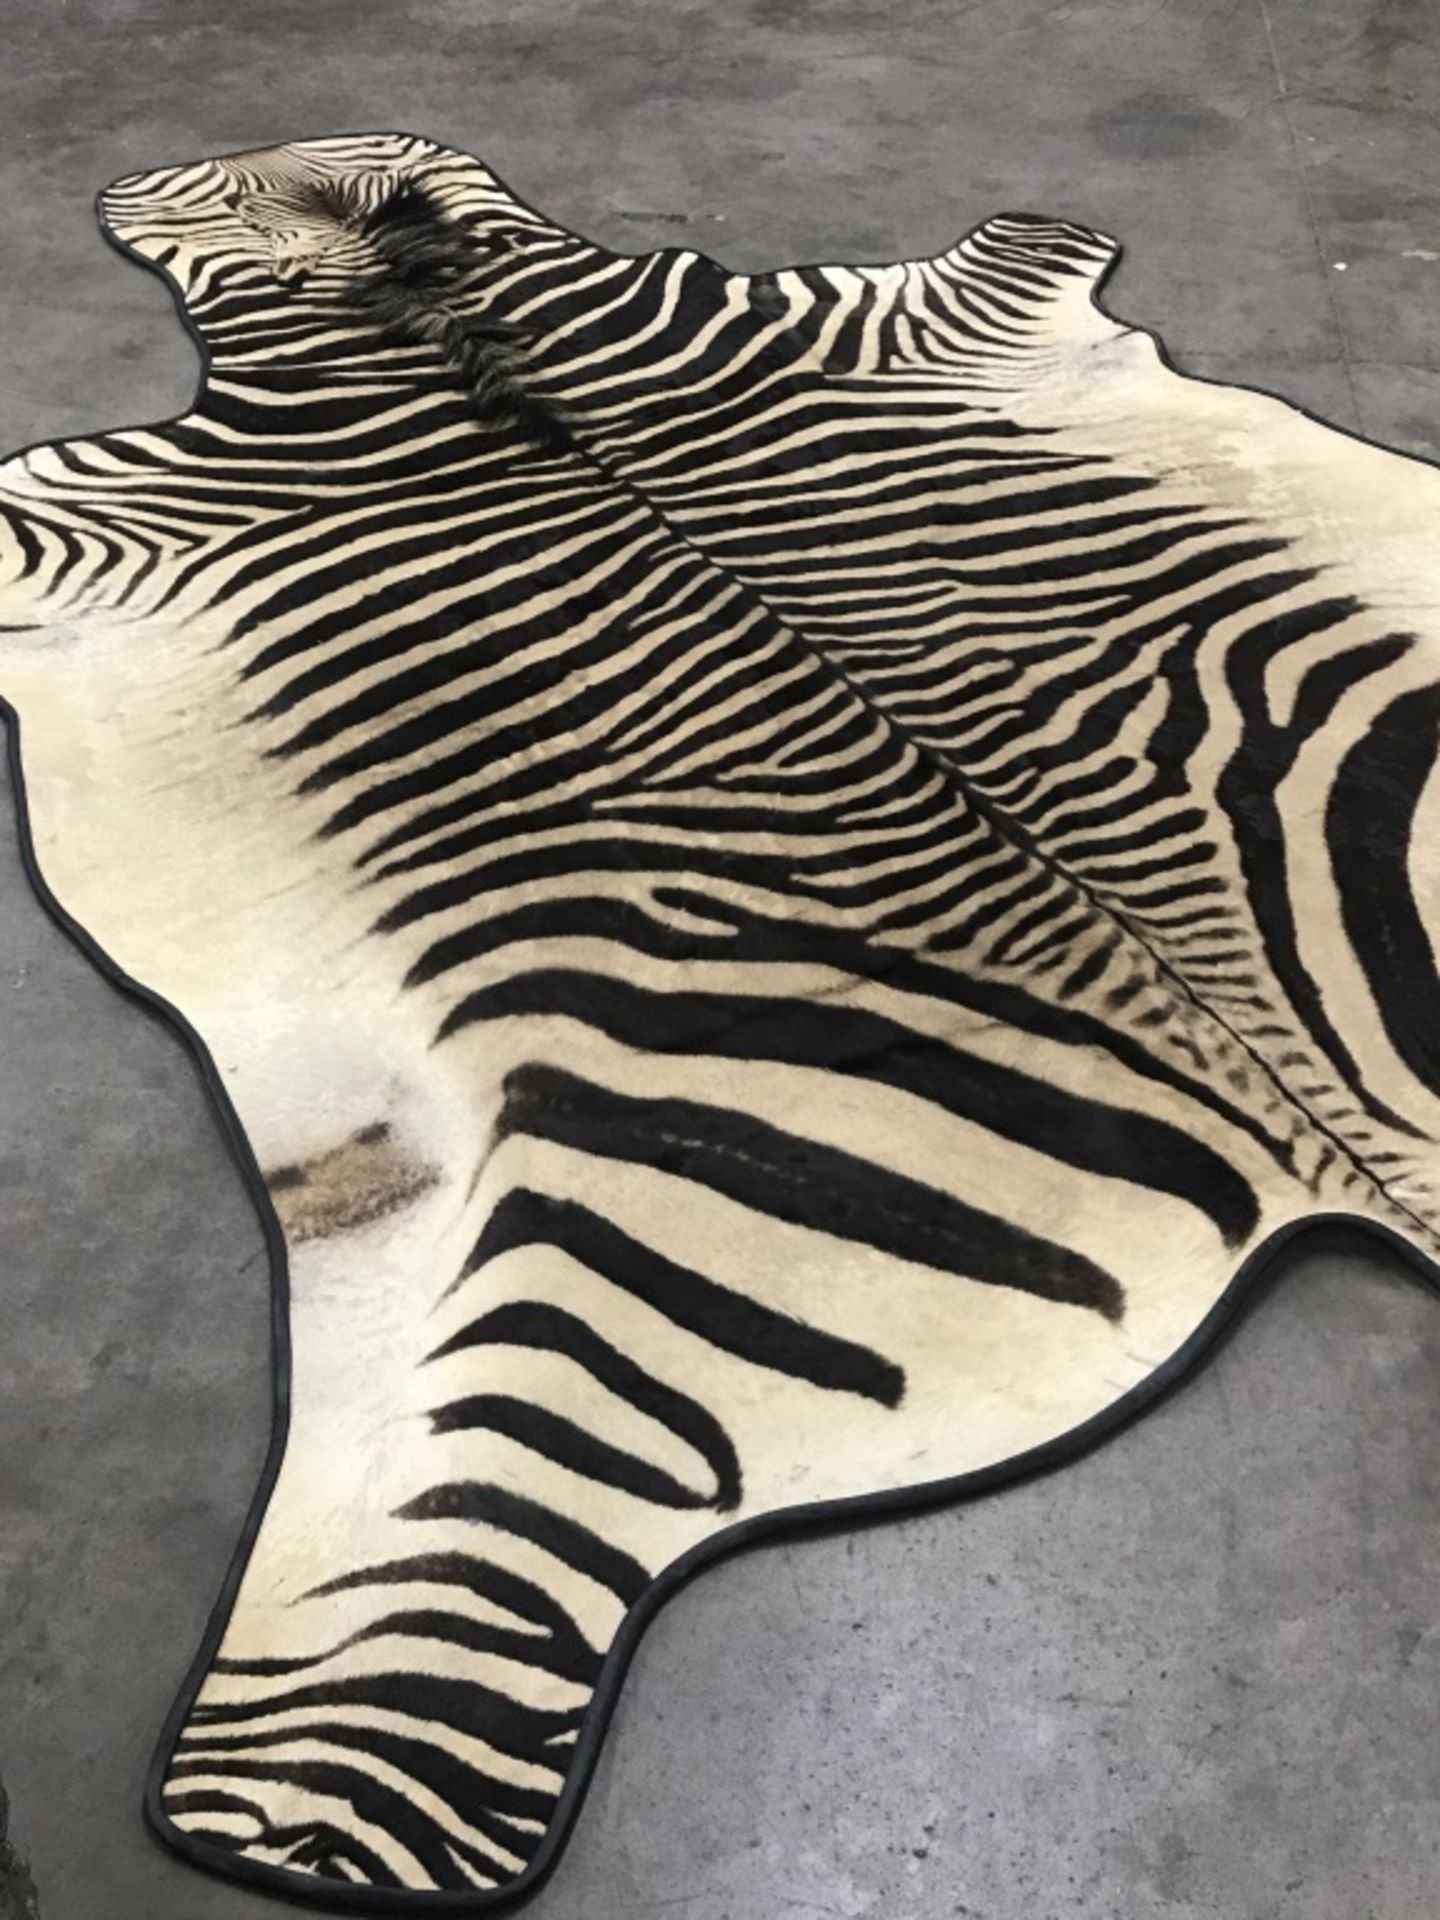 Very Nice Zebra Rug (TX Res. Only) - Image 13 of 13